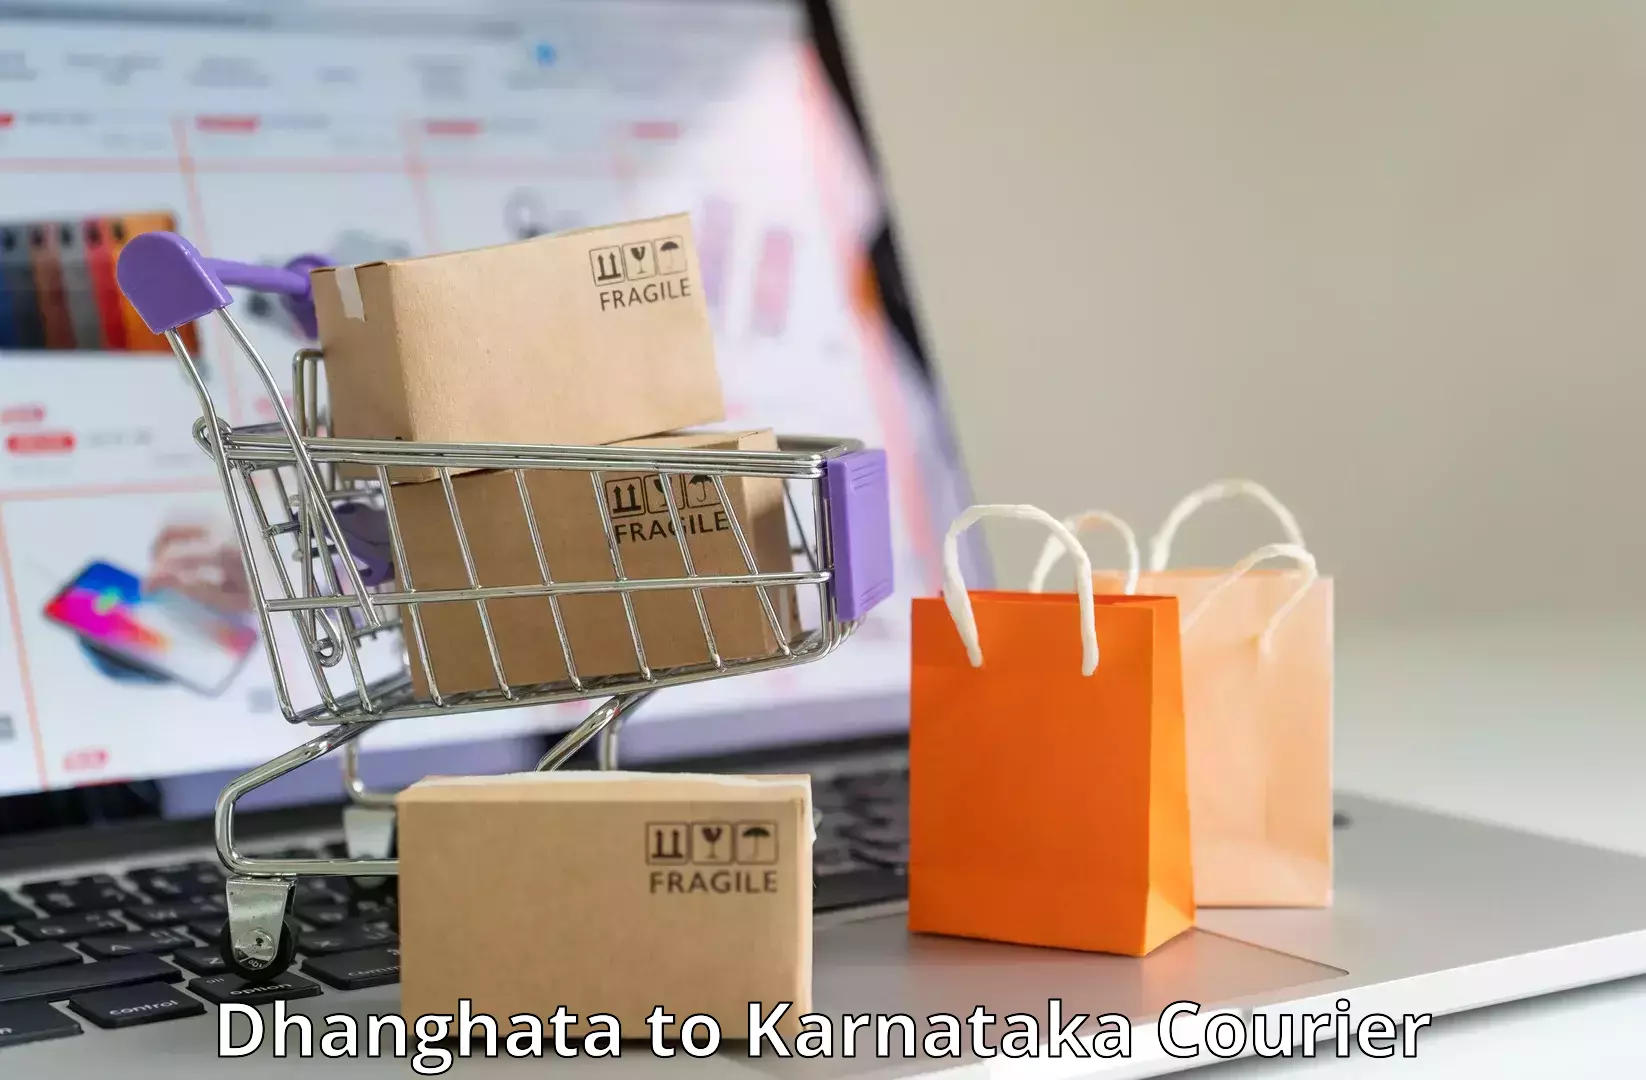 24-hour courier services Dhanghata to Yellare